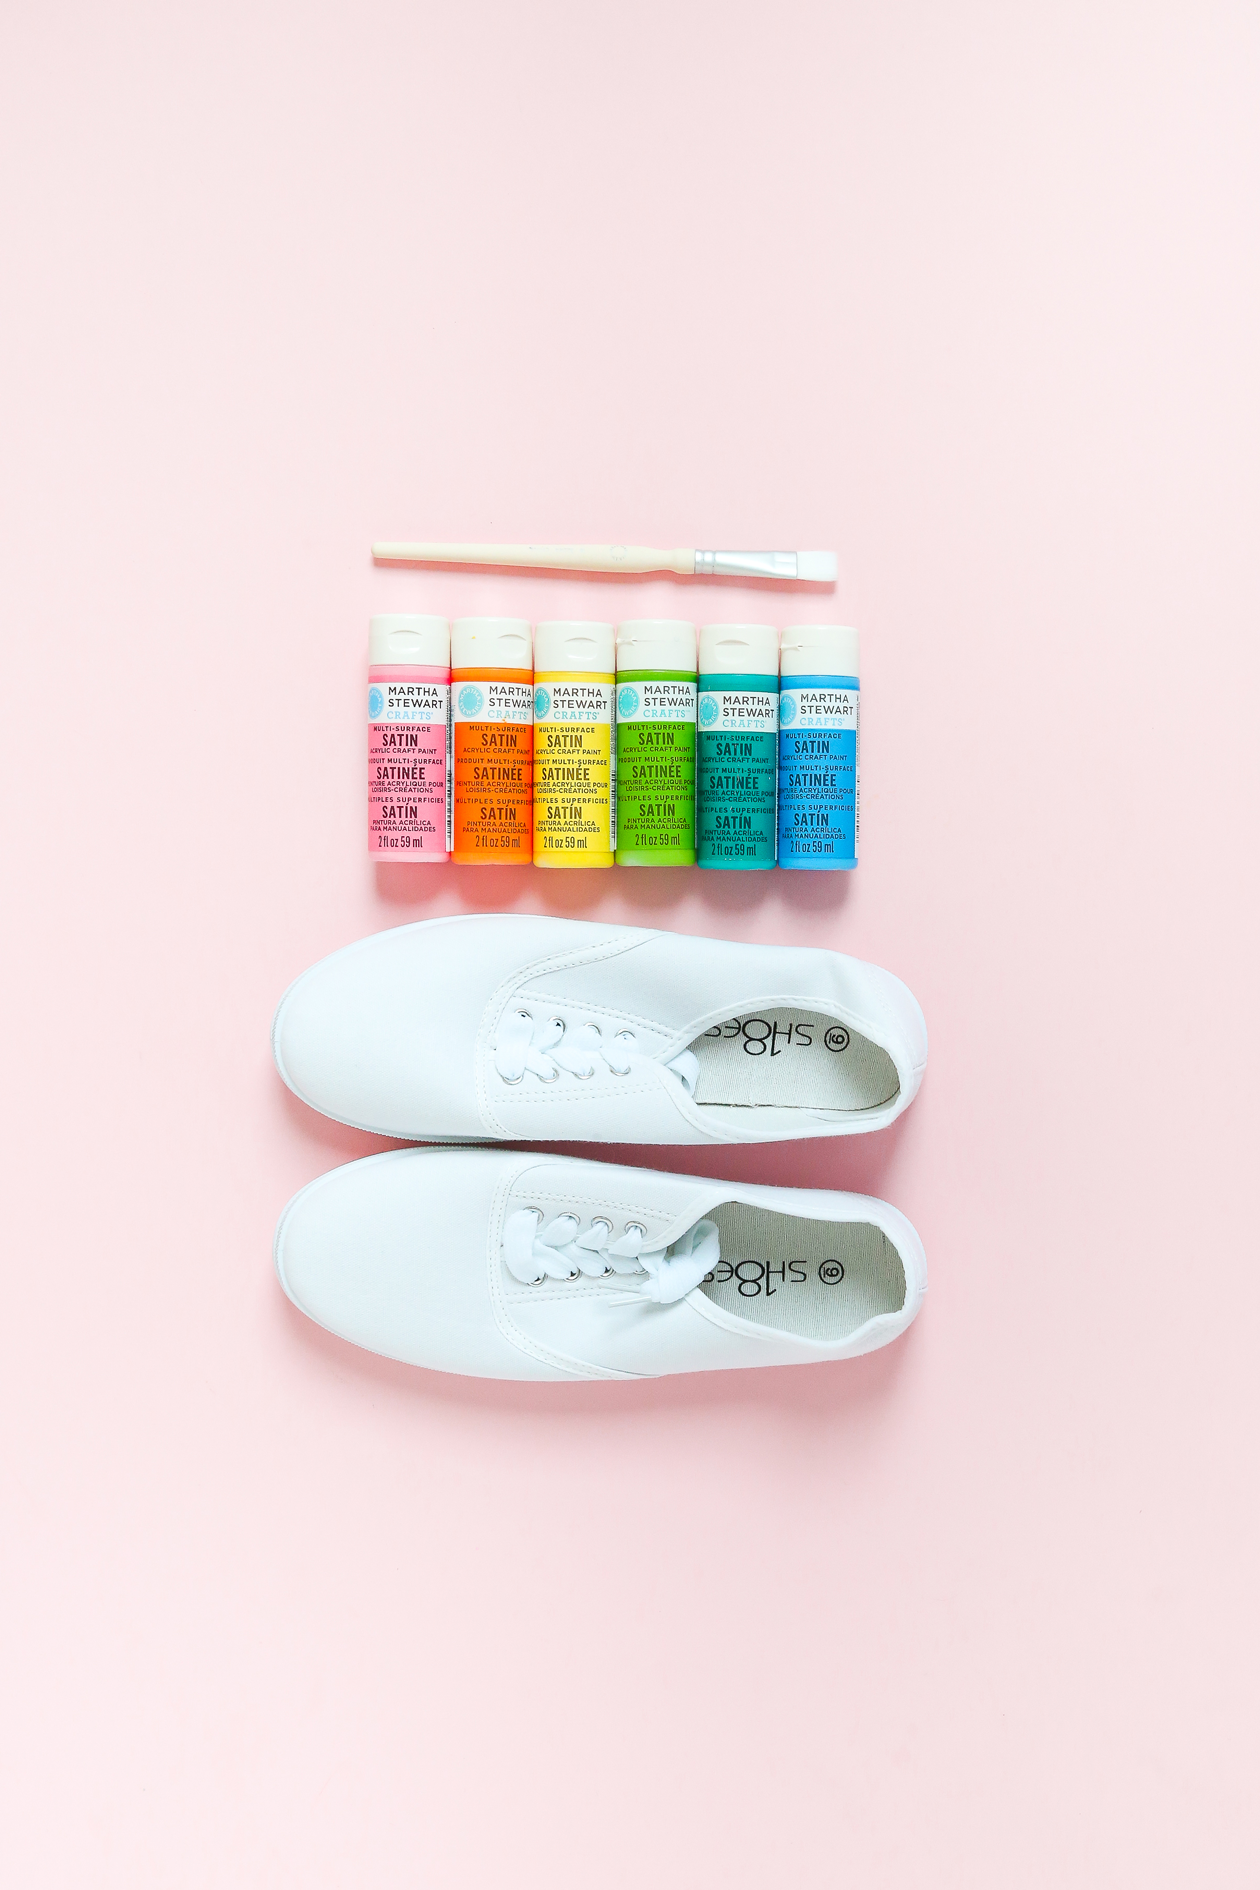  Want Kate Spade Shoes but don't have the budget? Try this easy DIY! Add color to your step with these DIY Confetti Shoes! Polka dot shoes every looked this cute.